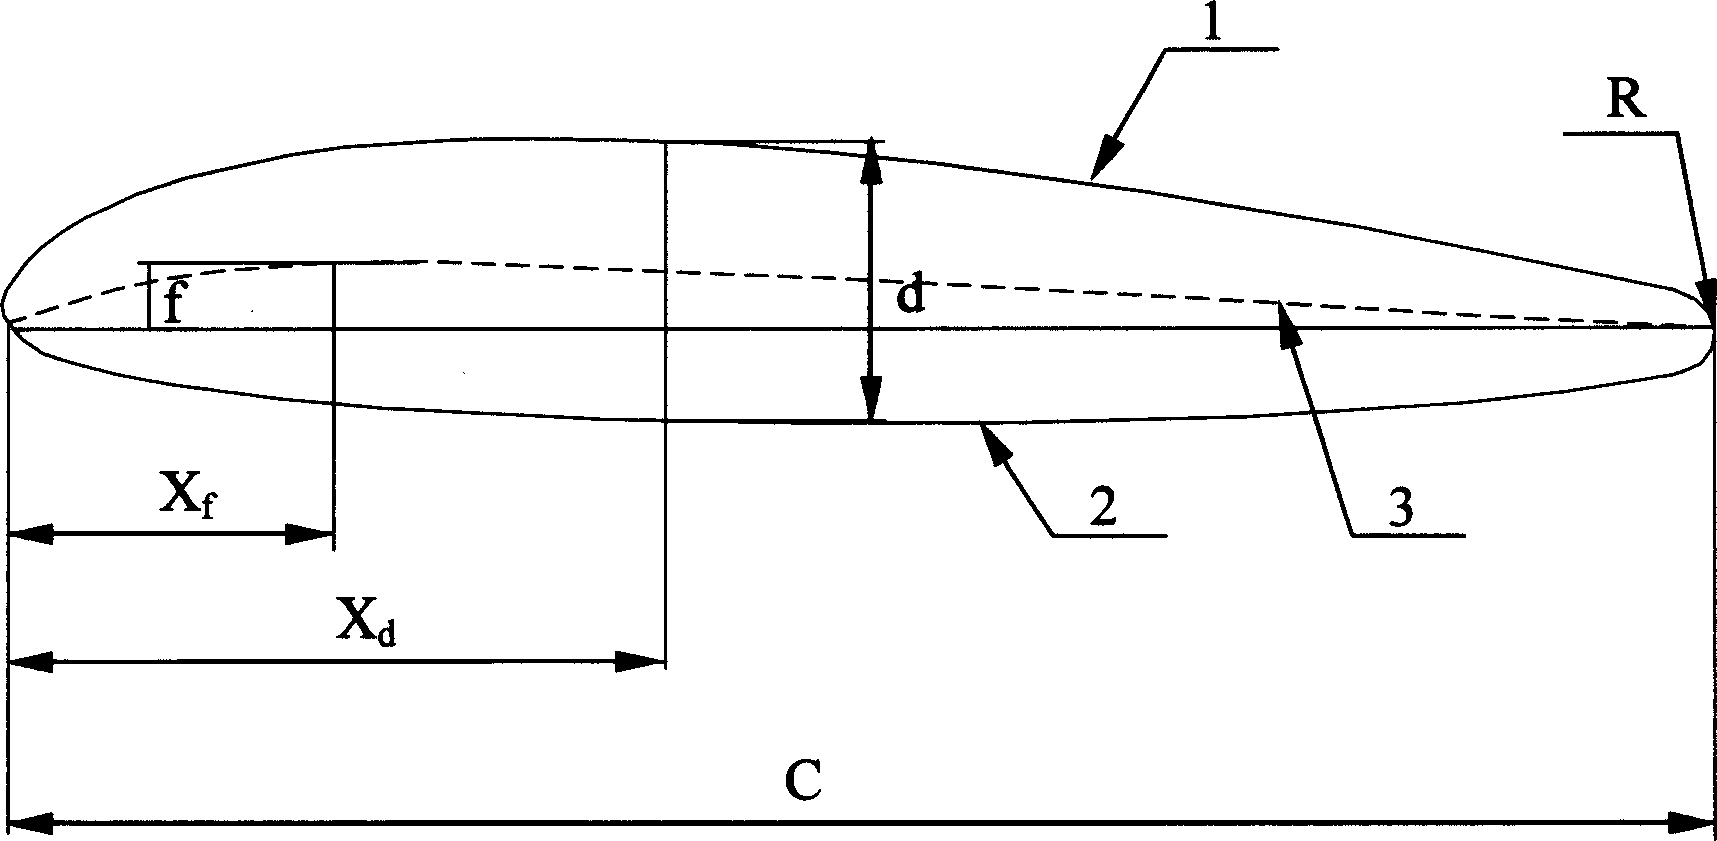 Water turbine wingsection for ocean current generation